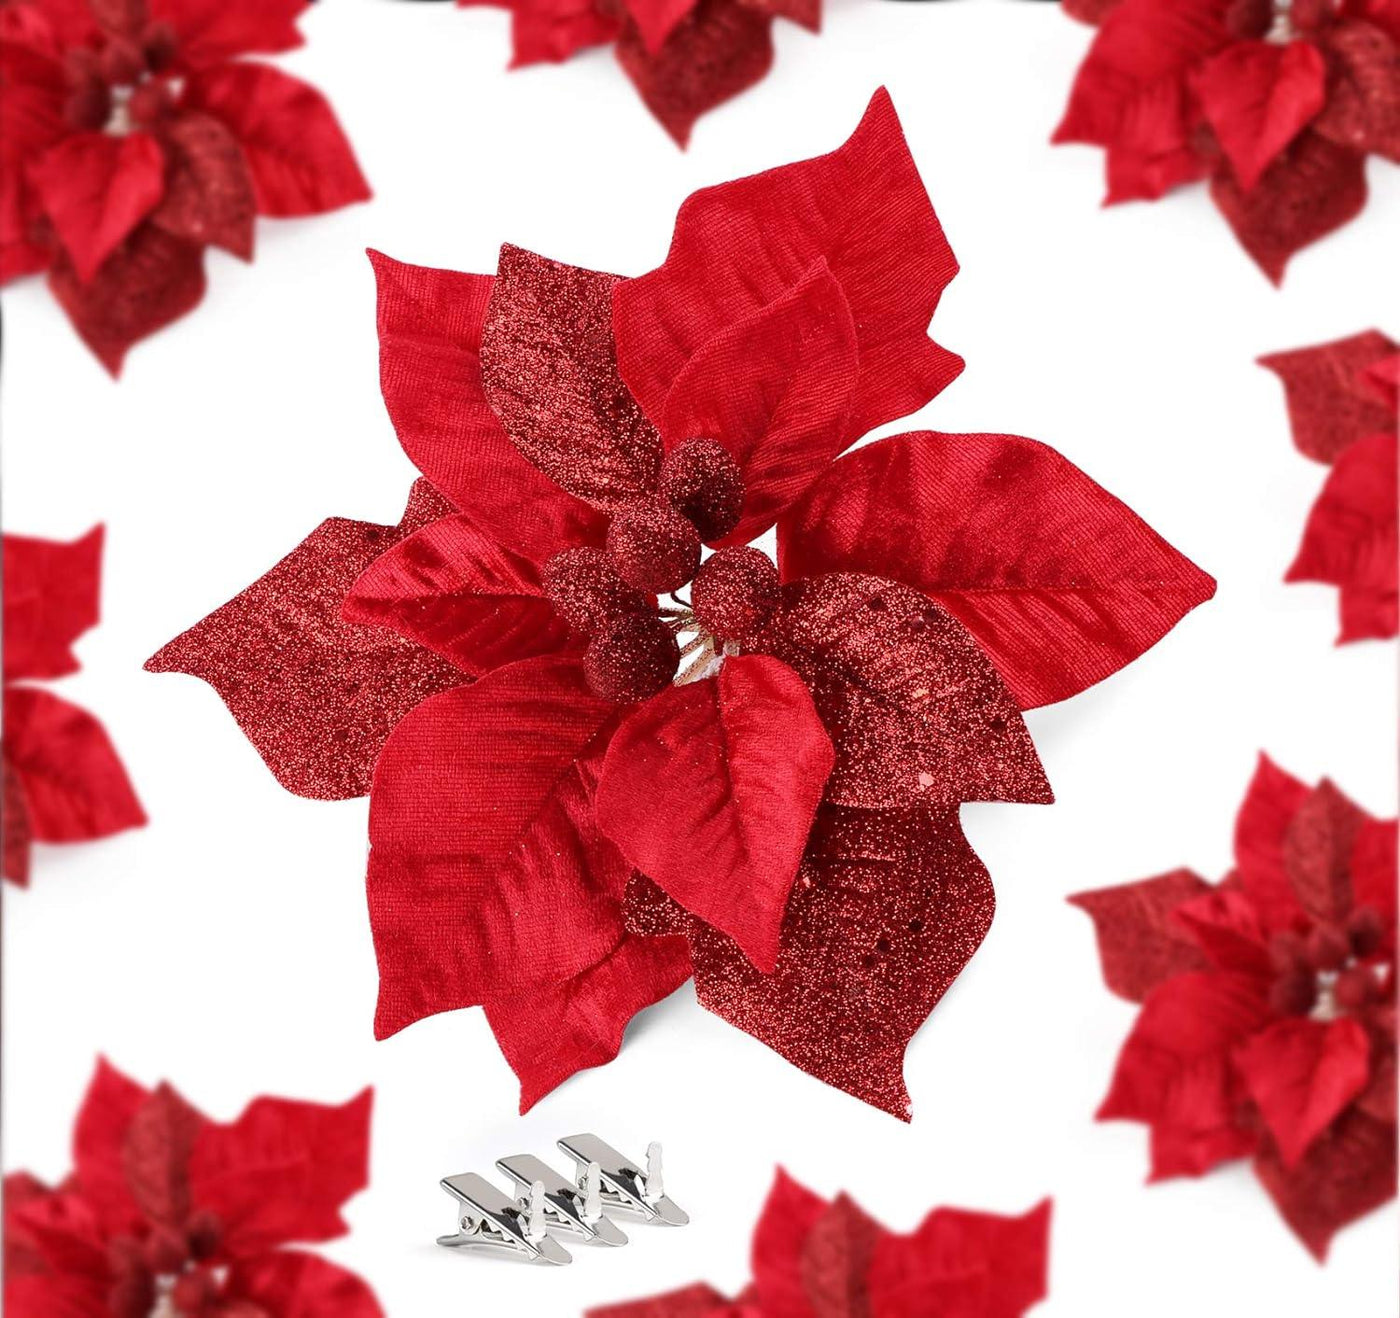 10 pcs Christmas Glittery Flower 23CM Red Ornament for Tree with Clips - Massive Discounts